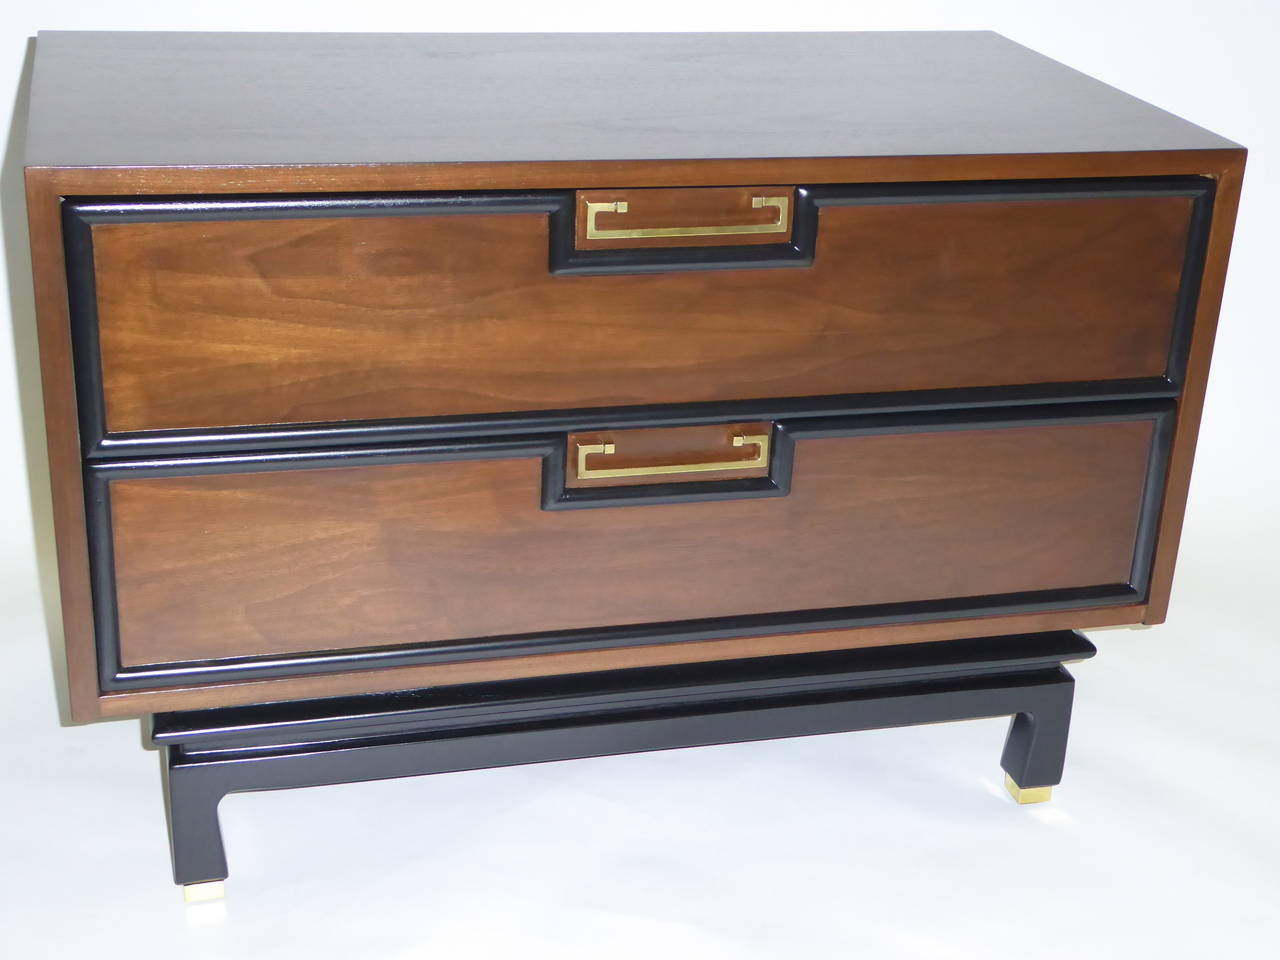 SOLD  Fine PAIR of great scale mid-century modern two drawer bedside tables in walnut with brass pulls and sabots.  These nightstands are accented around the drawers with black molding and a sculpted base with a slight Asian flair.  Beautifully